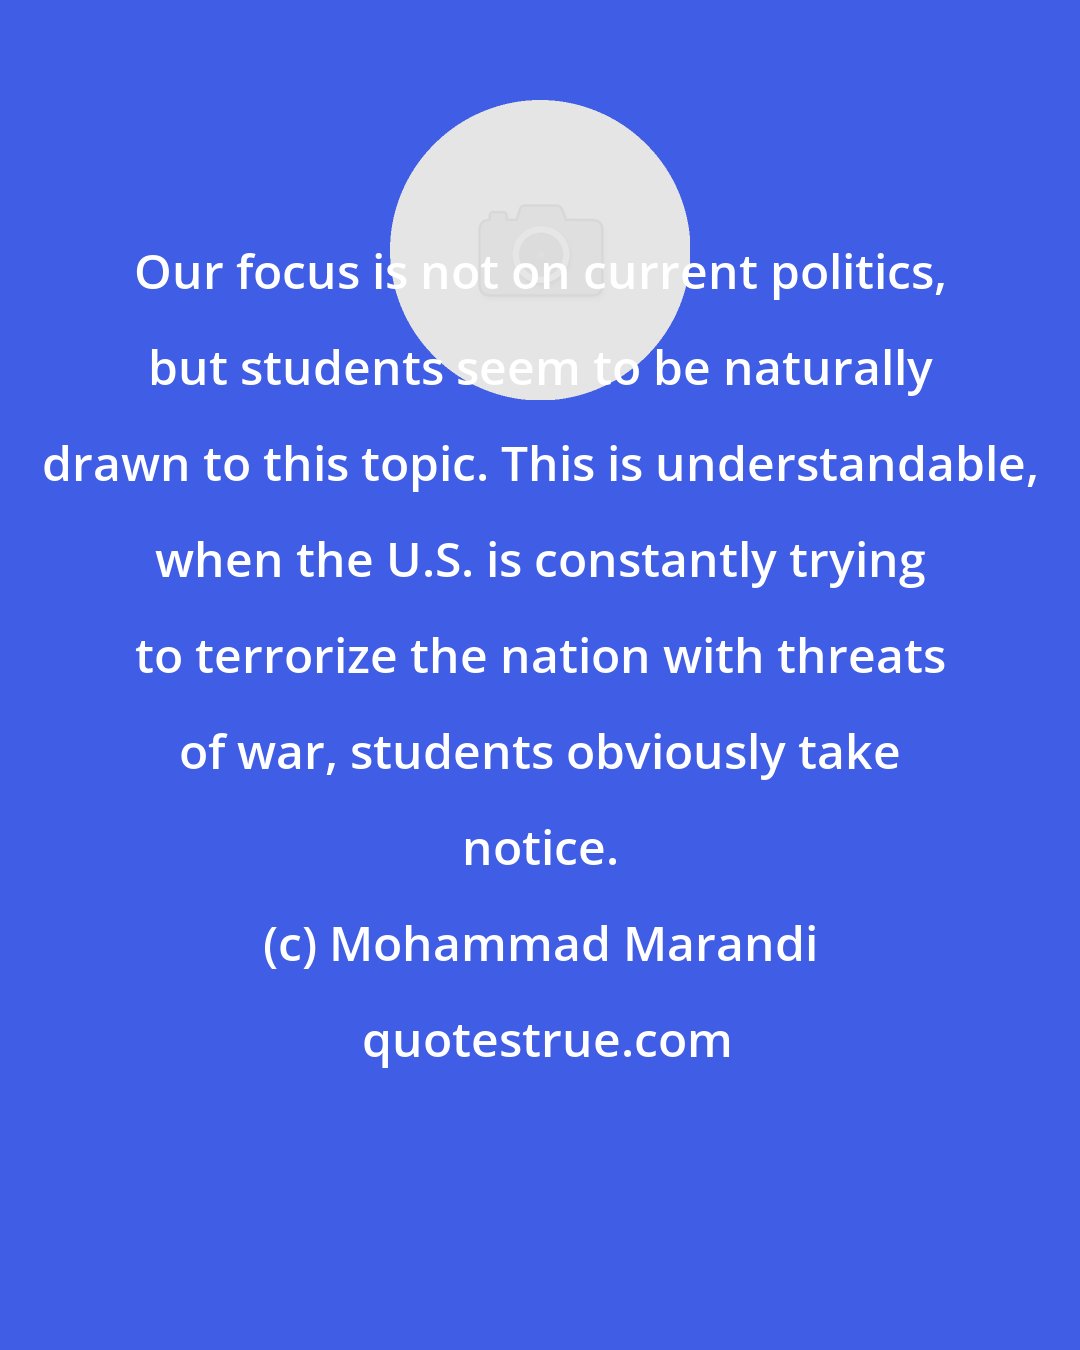 Mohammad Marandi: Our focus is not on current politics, but students seem to be naturally drawn to this topic. This is understandable, when the U.S. is constantly trying to terrorize the nation with threats of war, students obviously take notice.